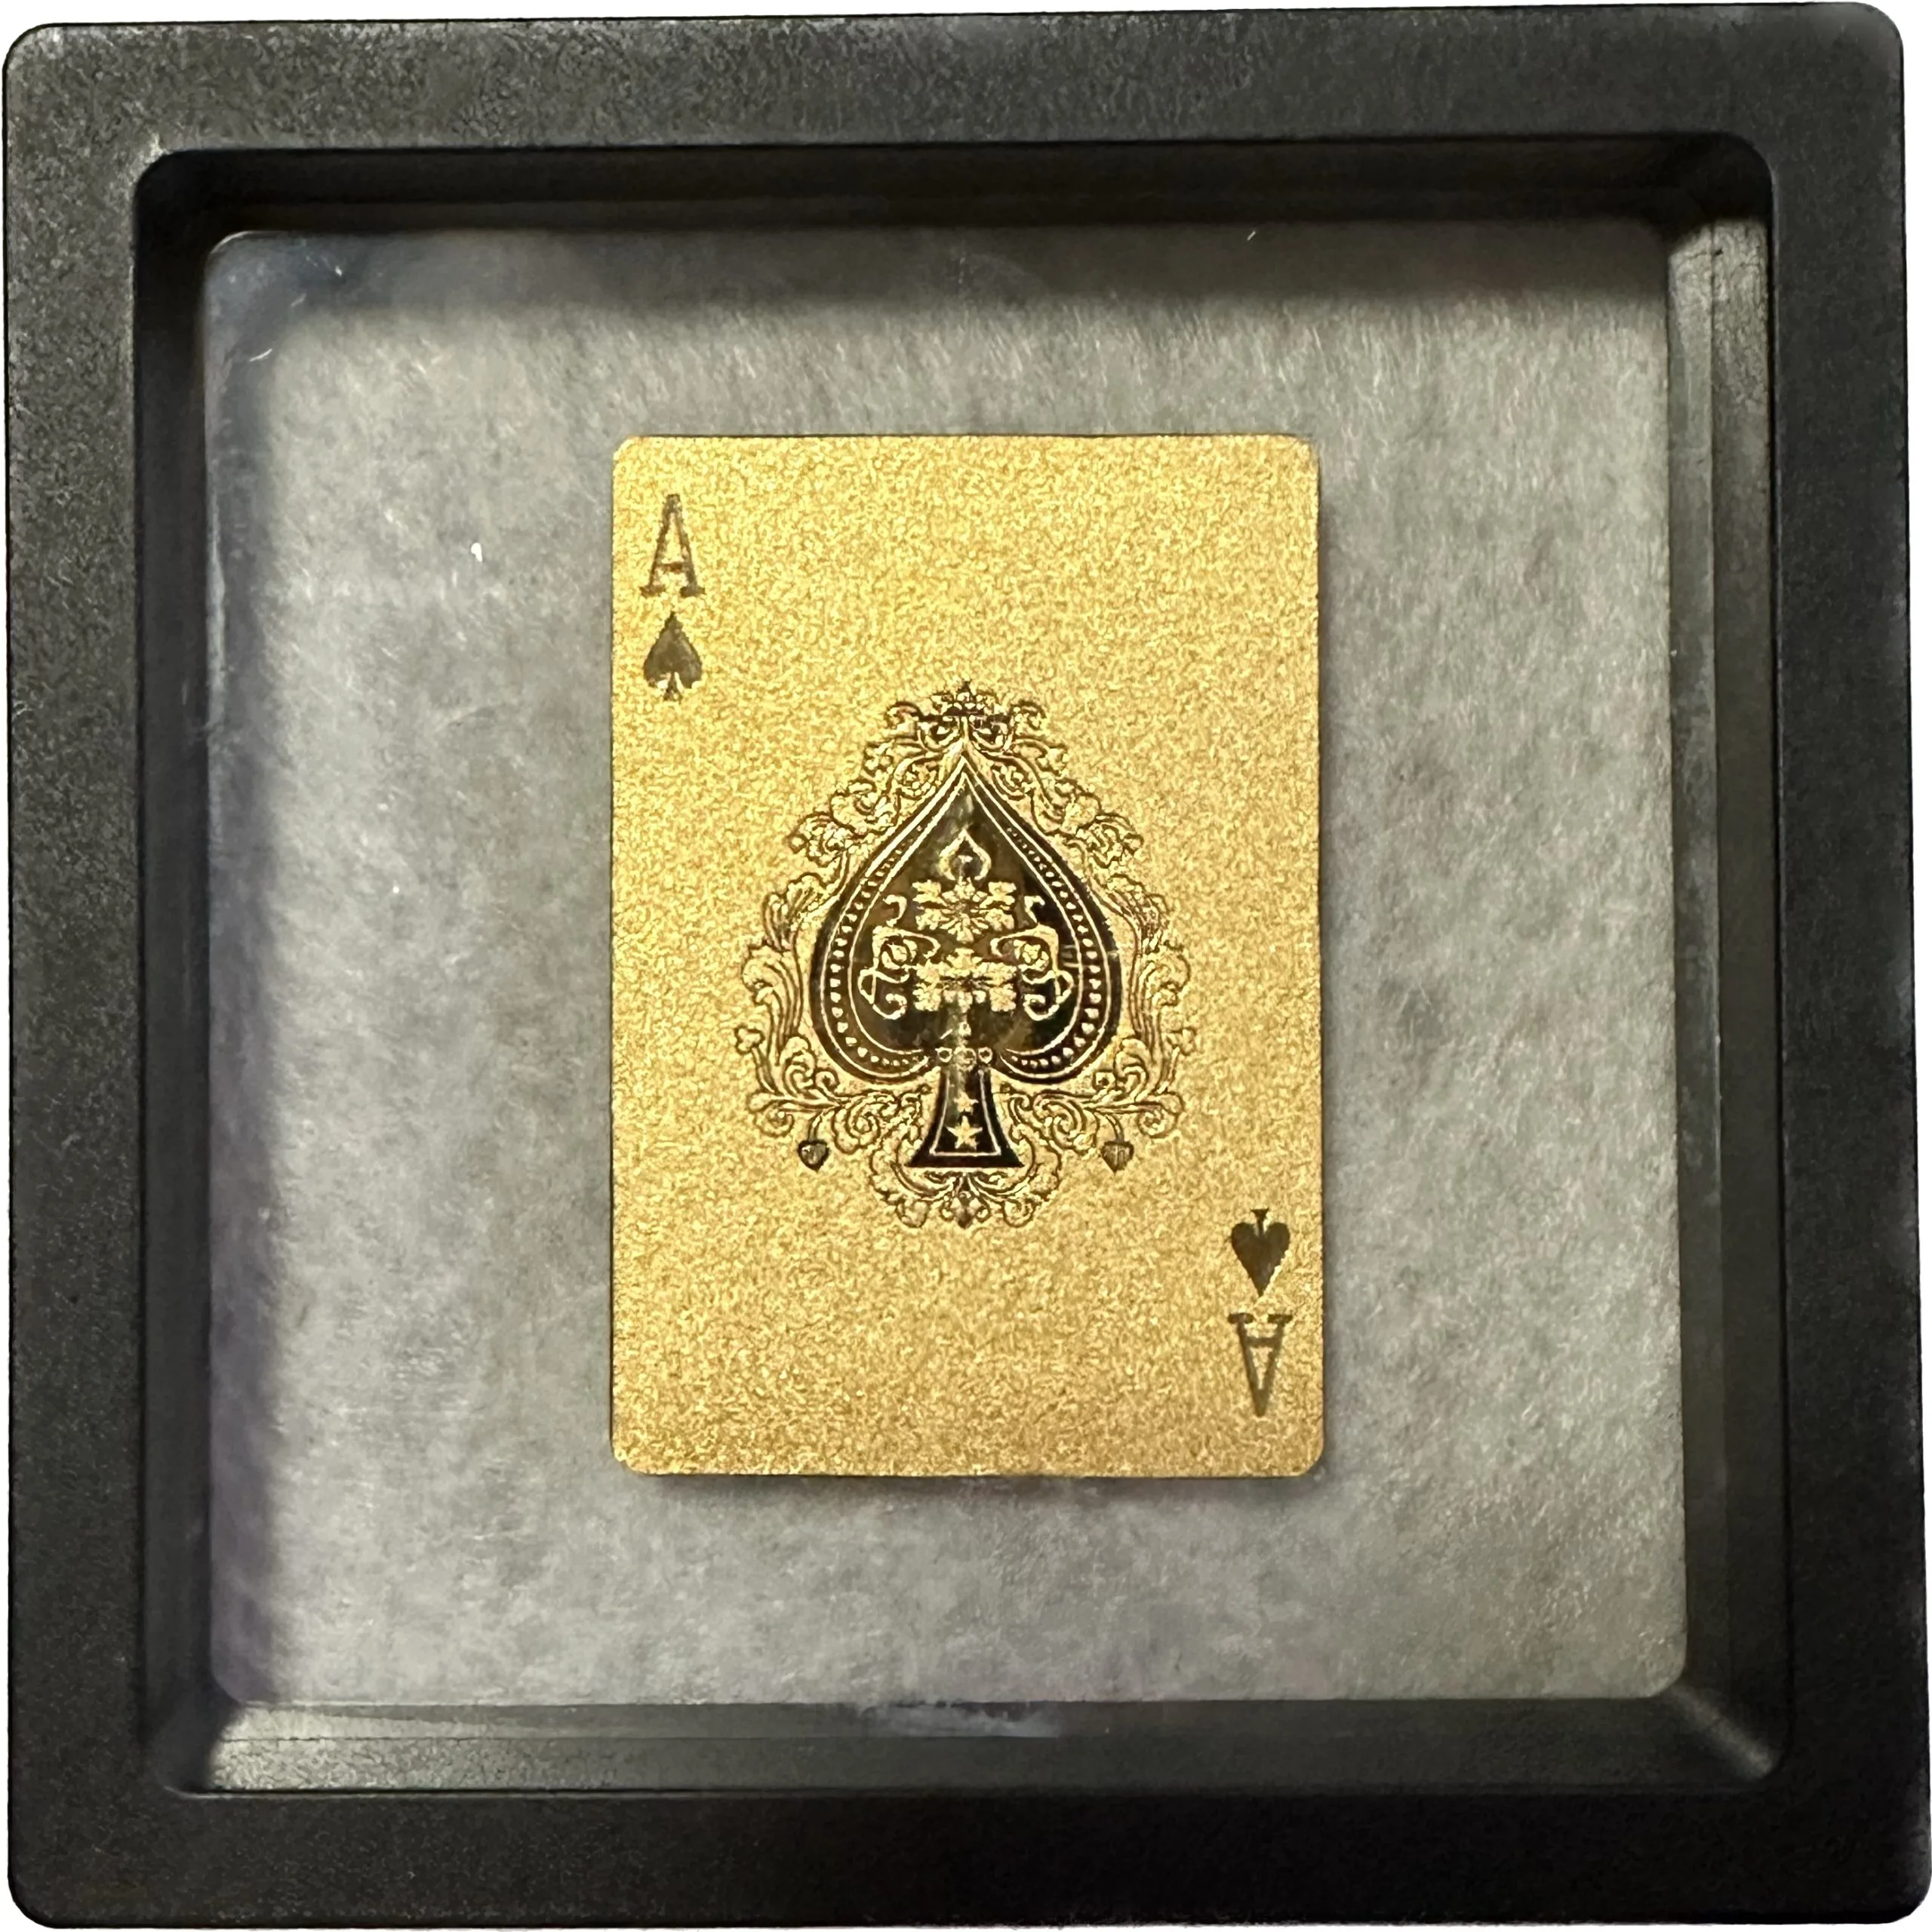 One of a kind 24k gold playing card, RARE Prehistoric Online